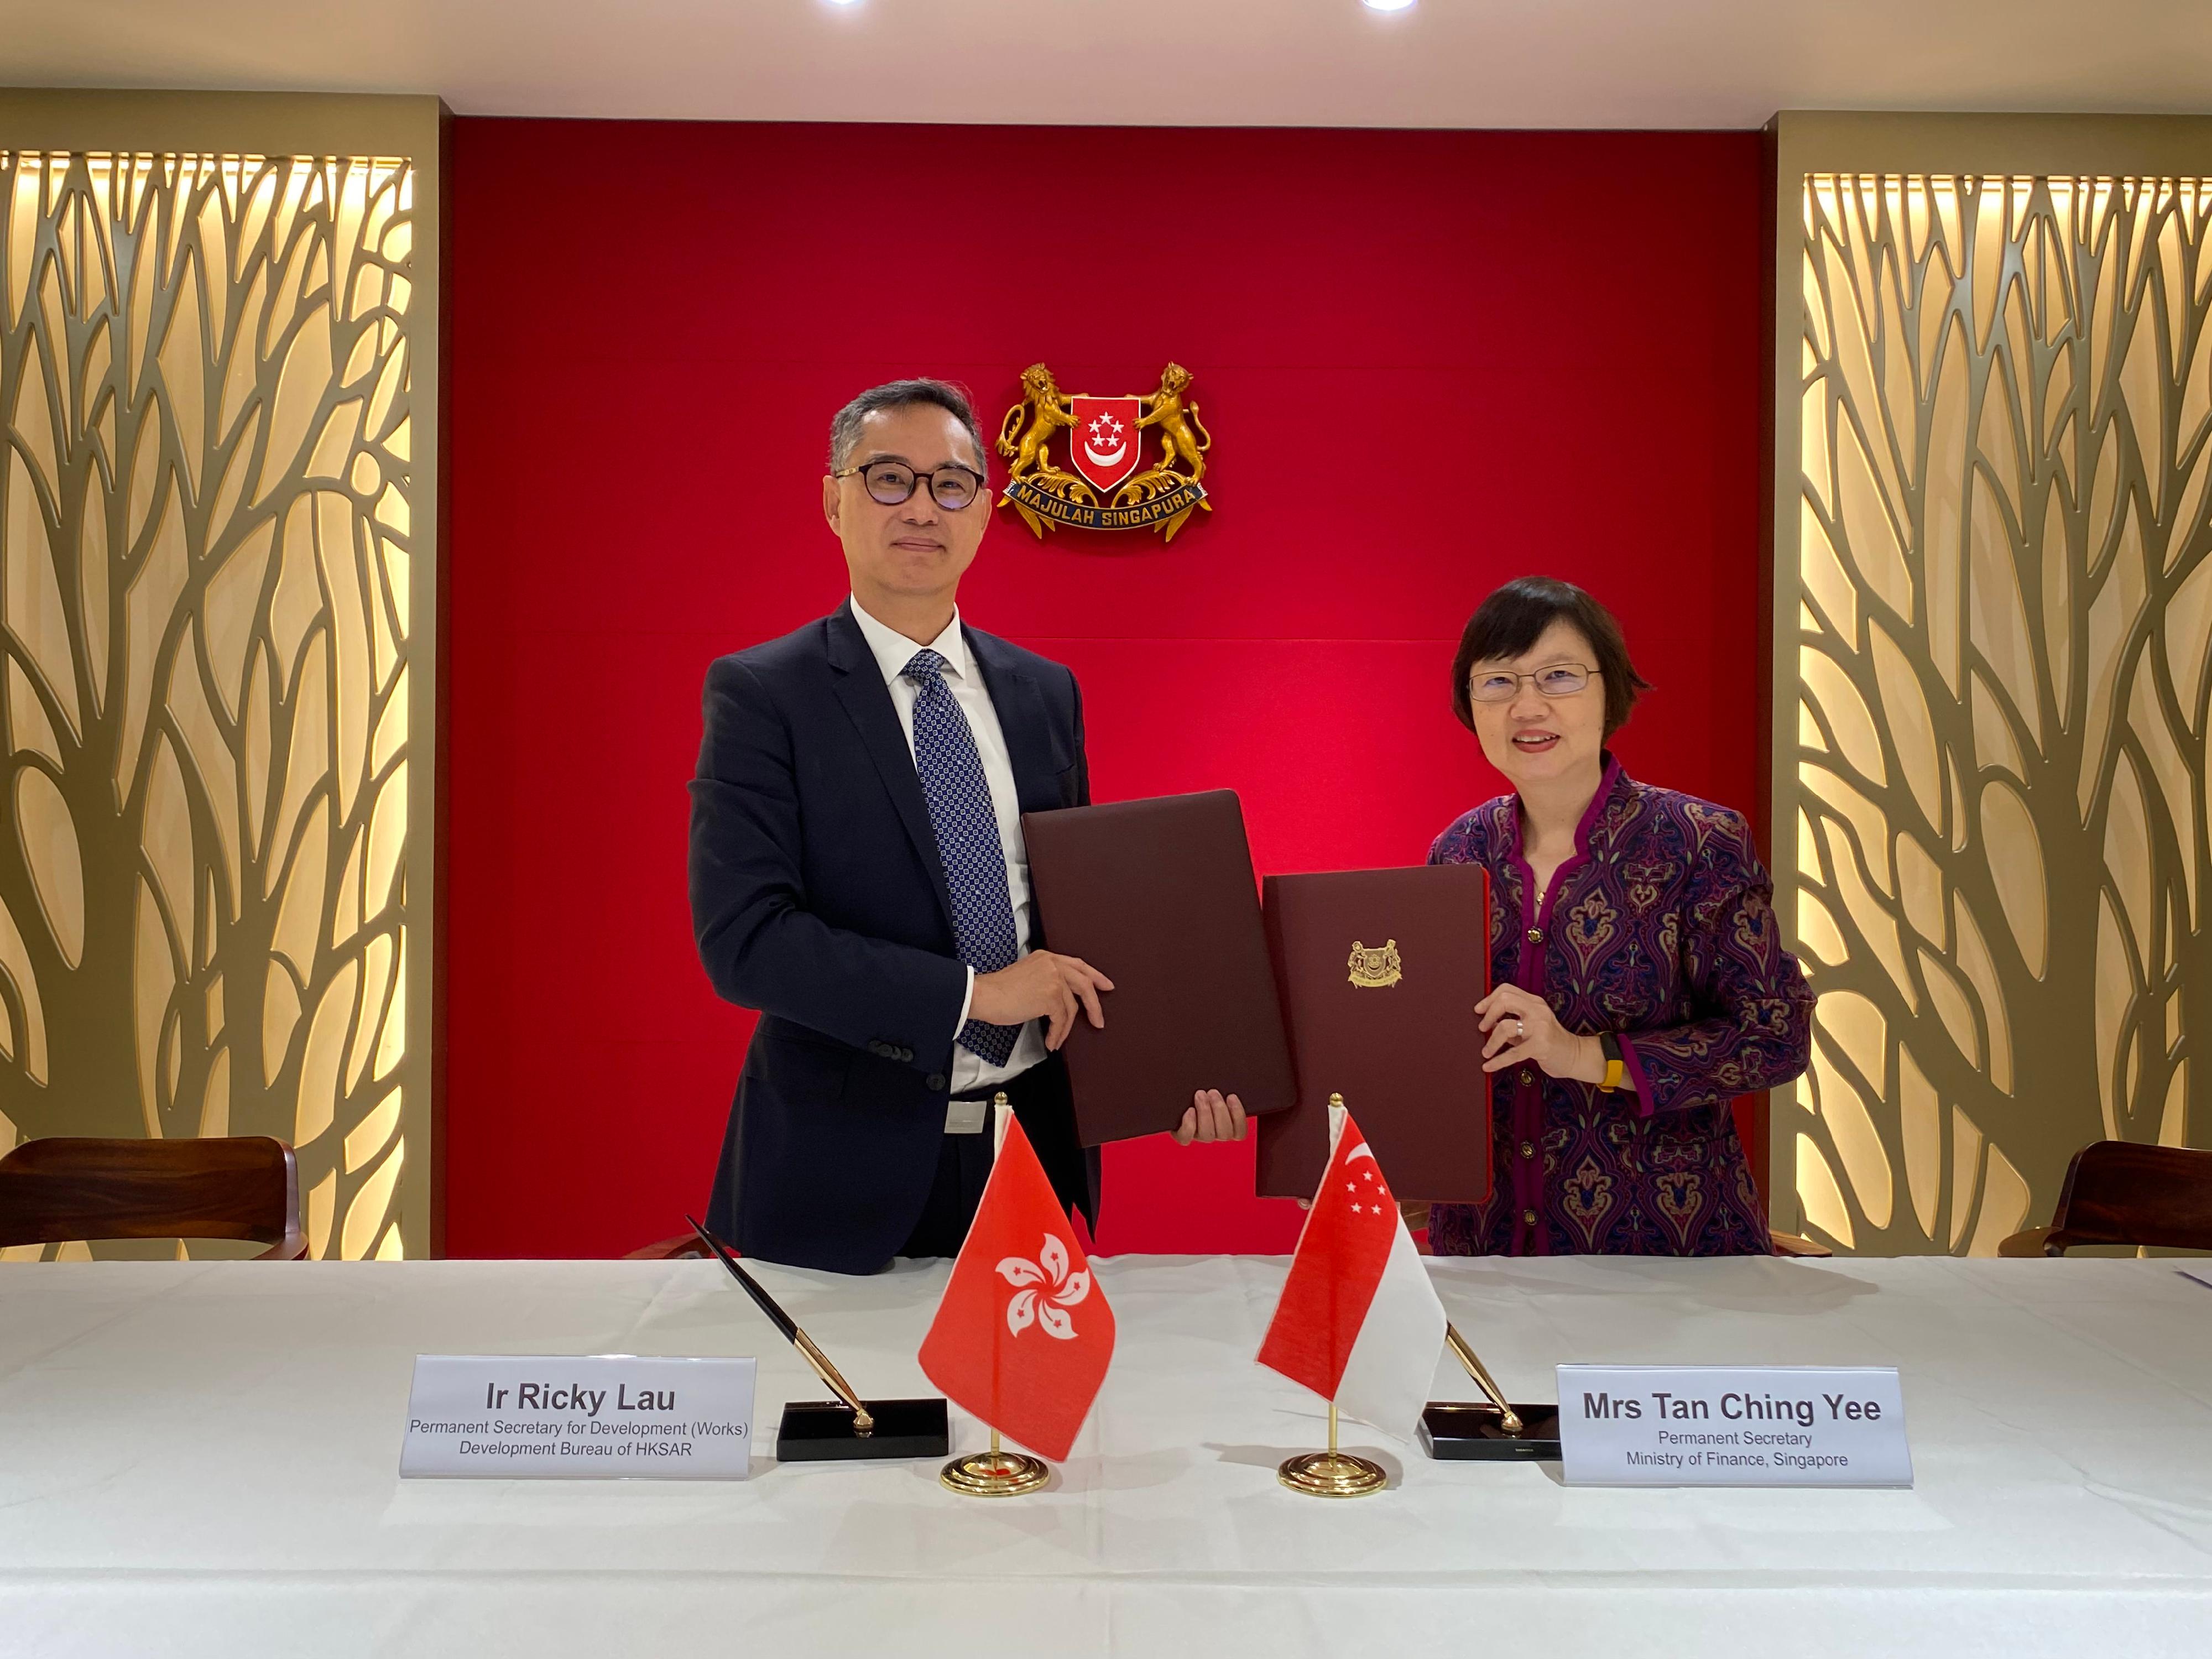 The Permanent Secretary for Development (Works), Mr Ricky Lau (left), and the Permanent Secretary of the Ministry of Finance of Singapore, Mrs Tan Ching Yee (right), signed a Memorandum of Understanding in Singapore today (December 1) to enhance expertise and experience exchanges in infrastructure project management and delivery.